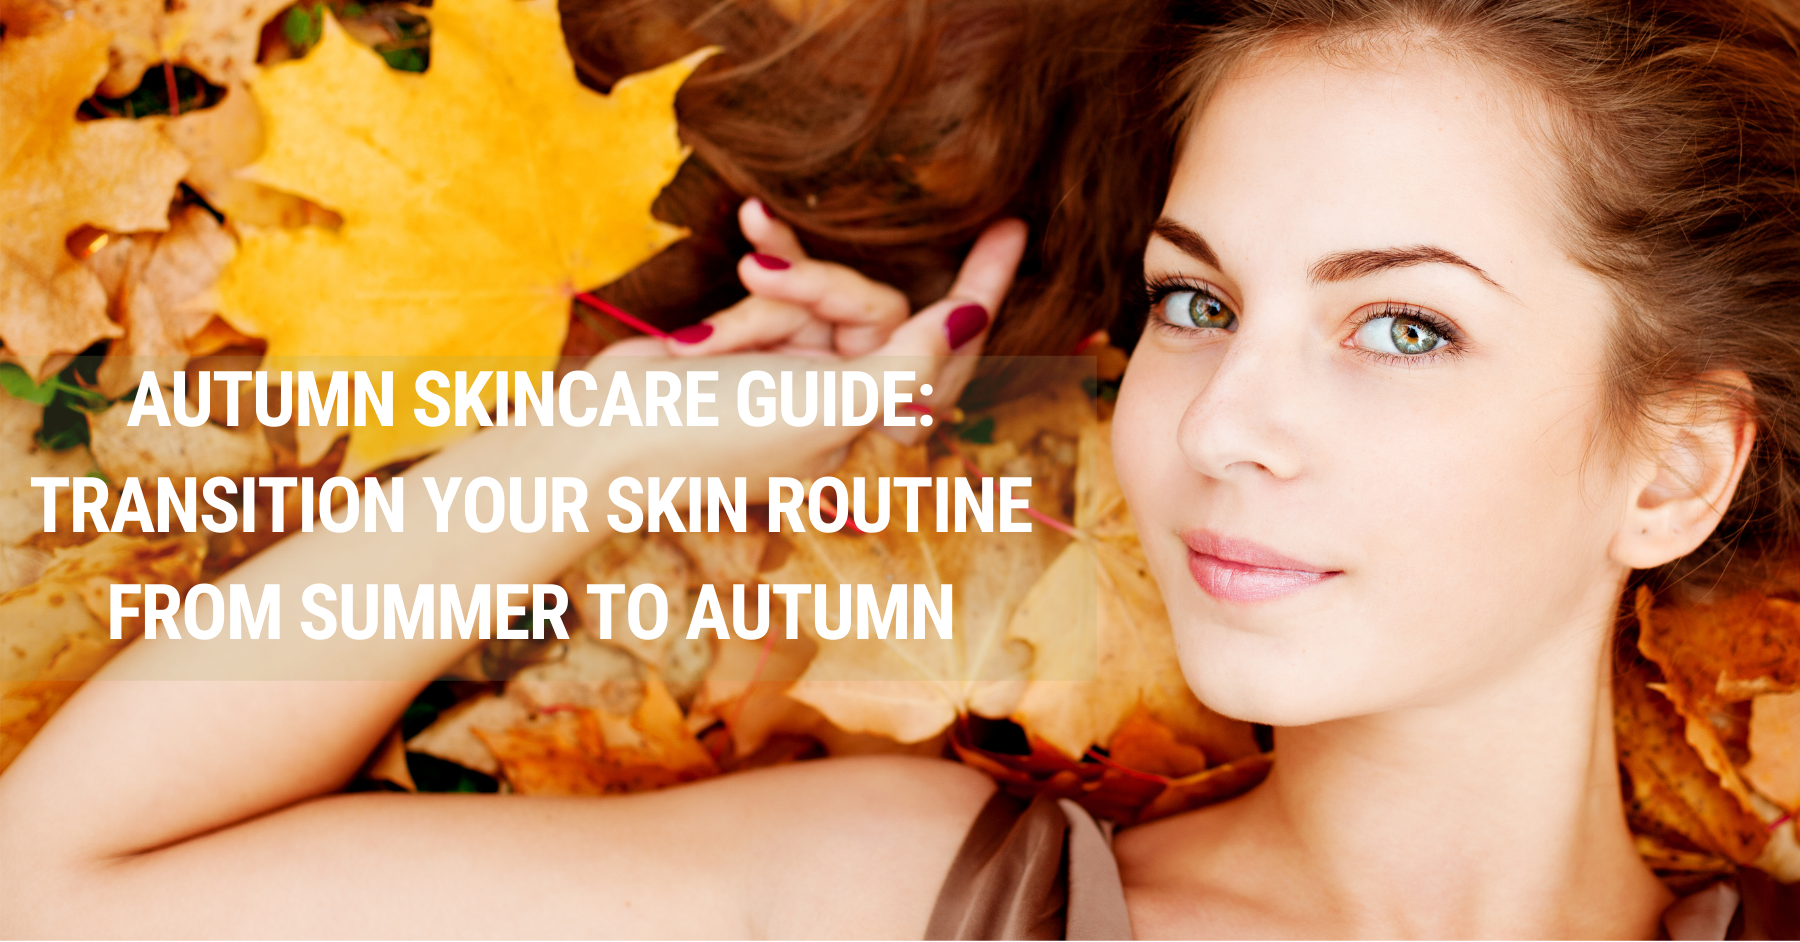 UPDATE YOUR SKINCARE ROUTINE FOR FALL